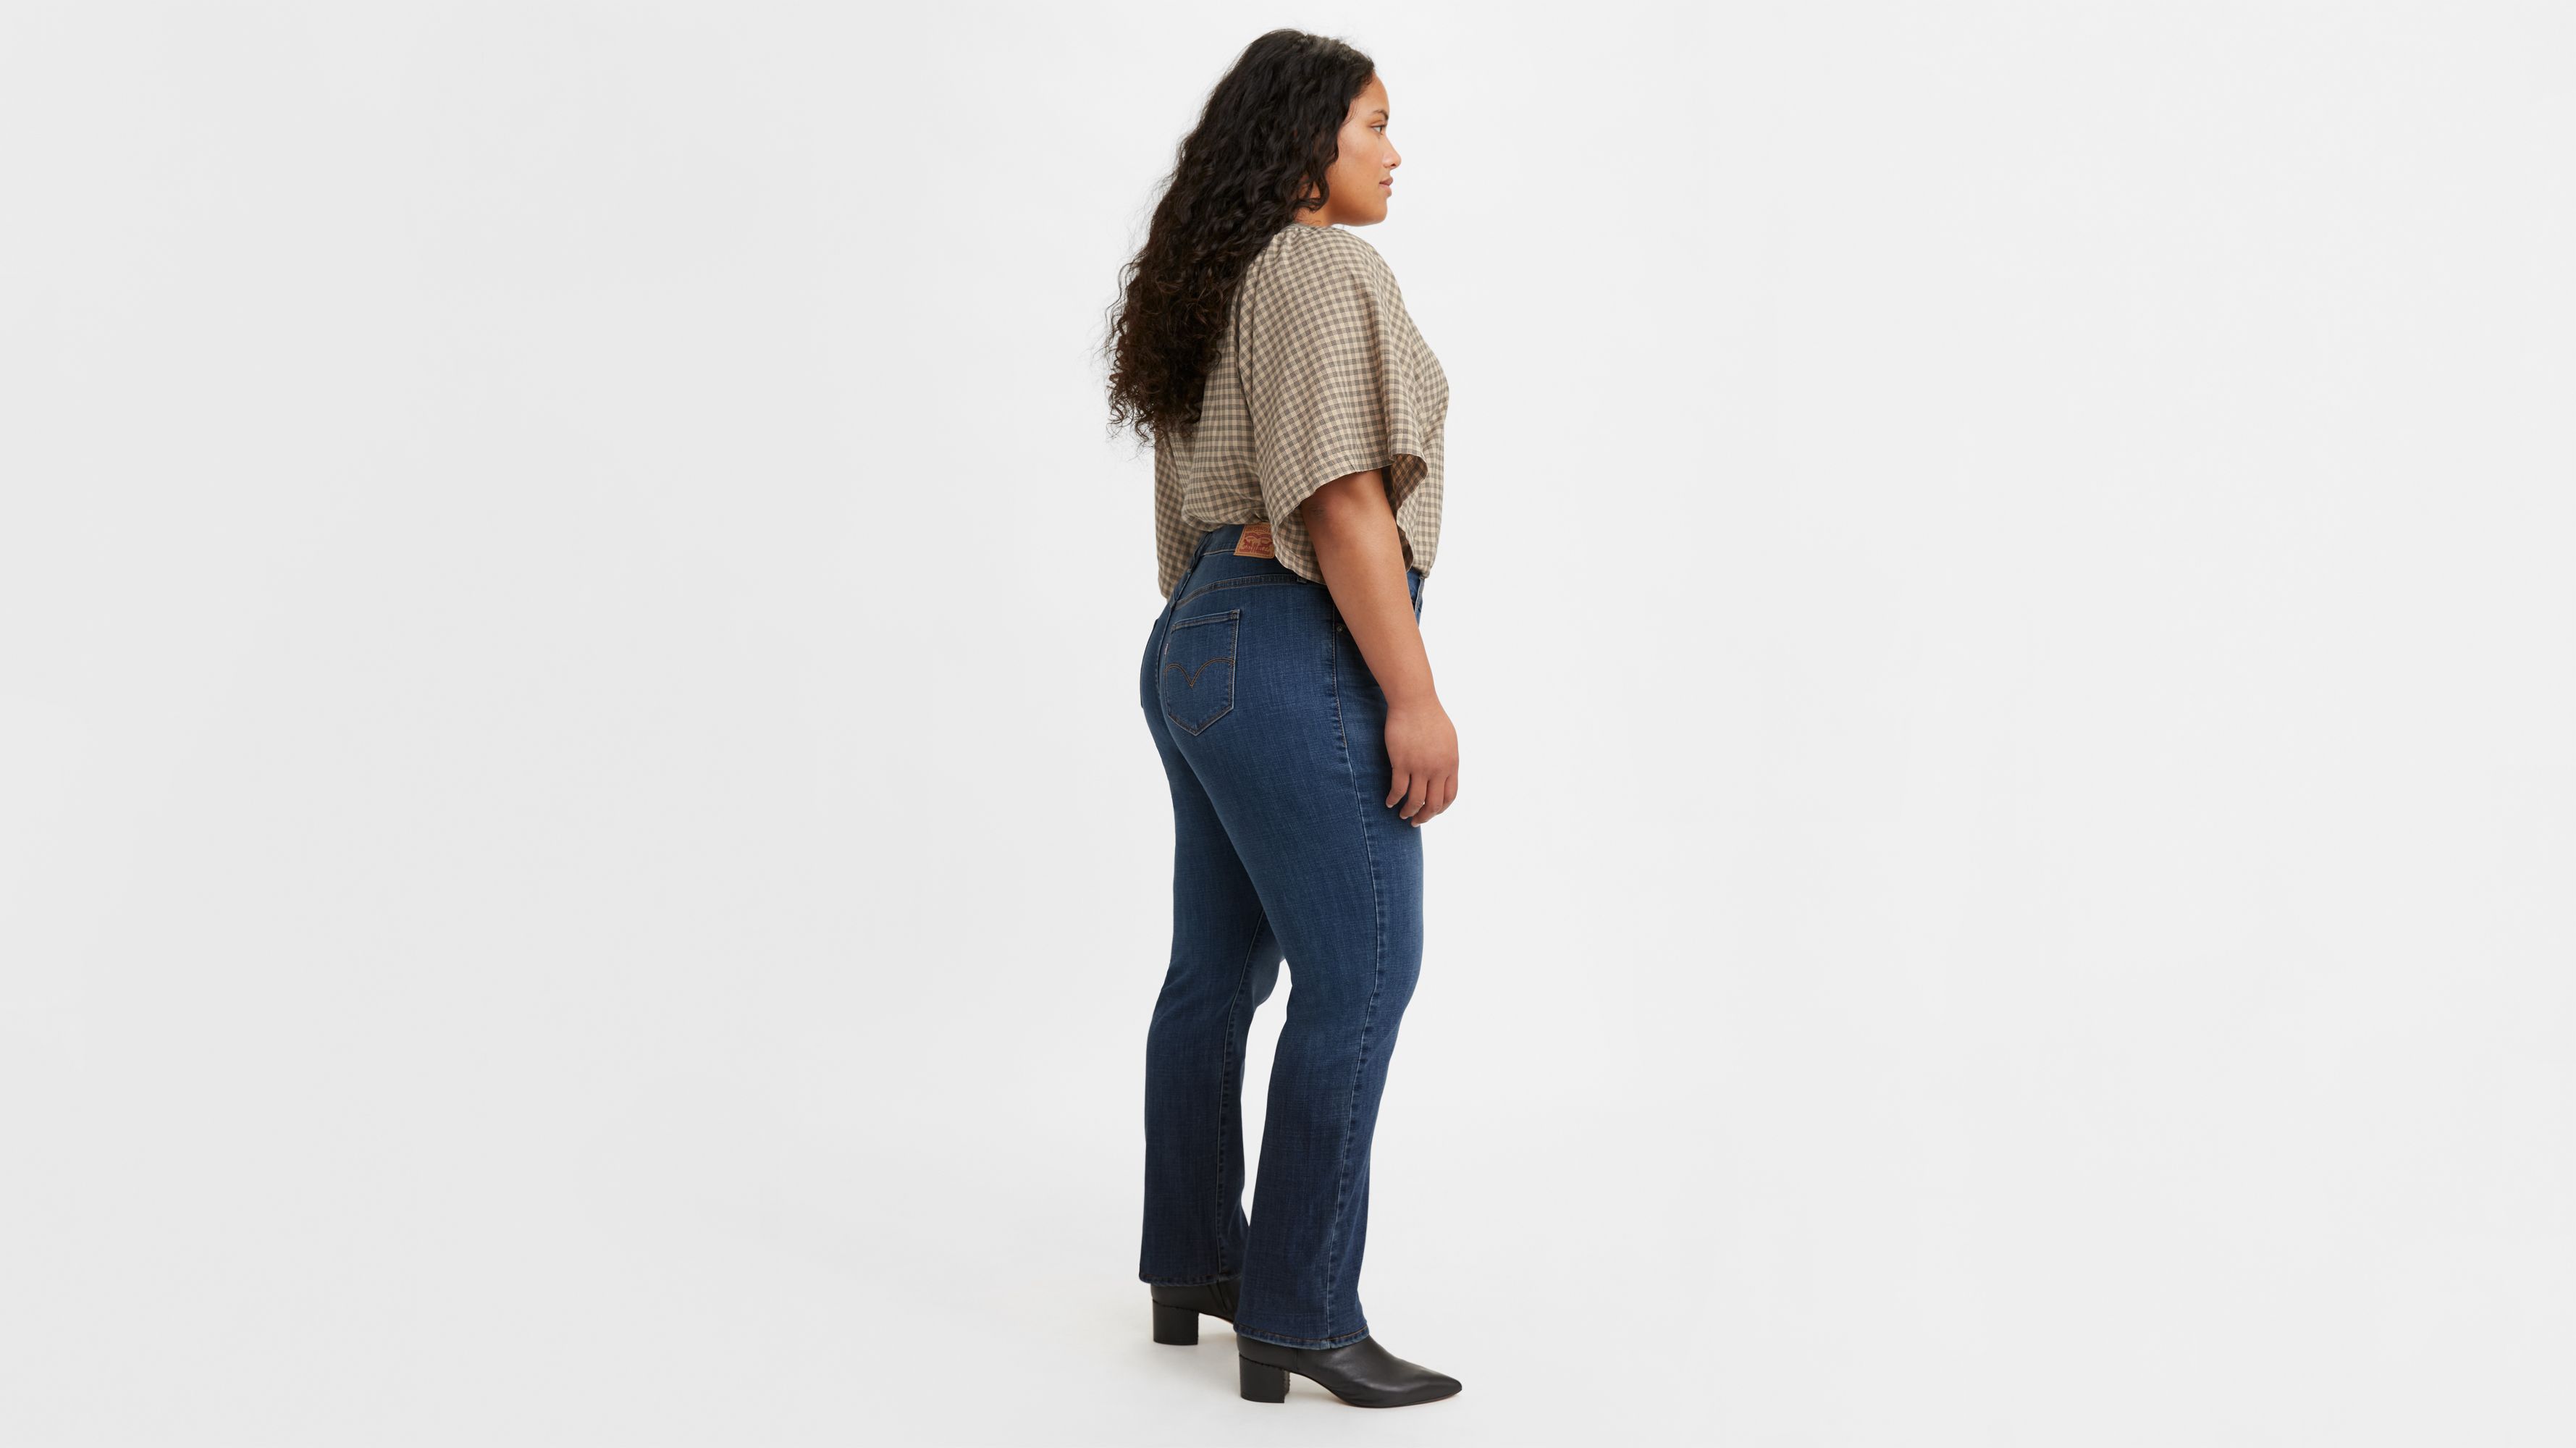 314 Shaping Straight Fit Women's Jeans (plus Size) - Dark Wash